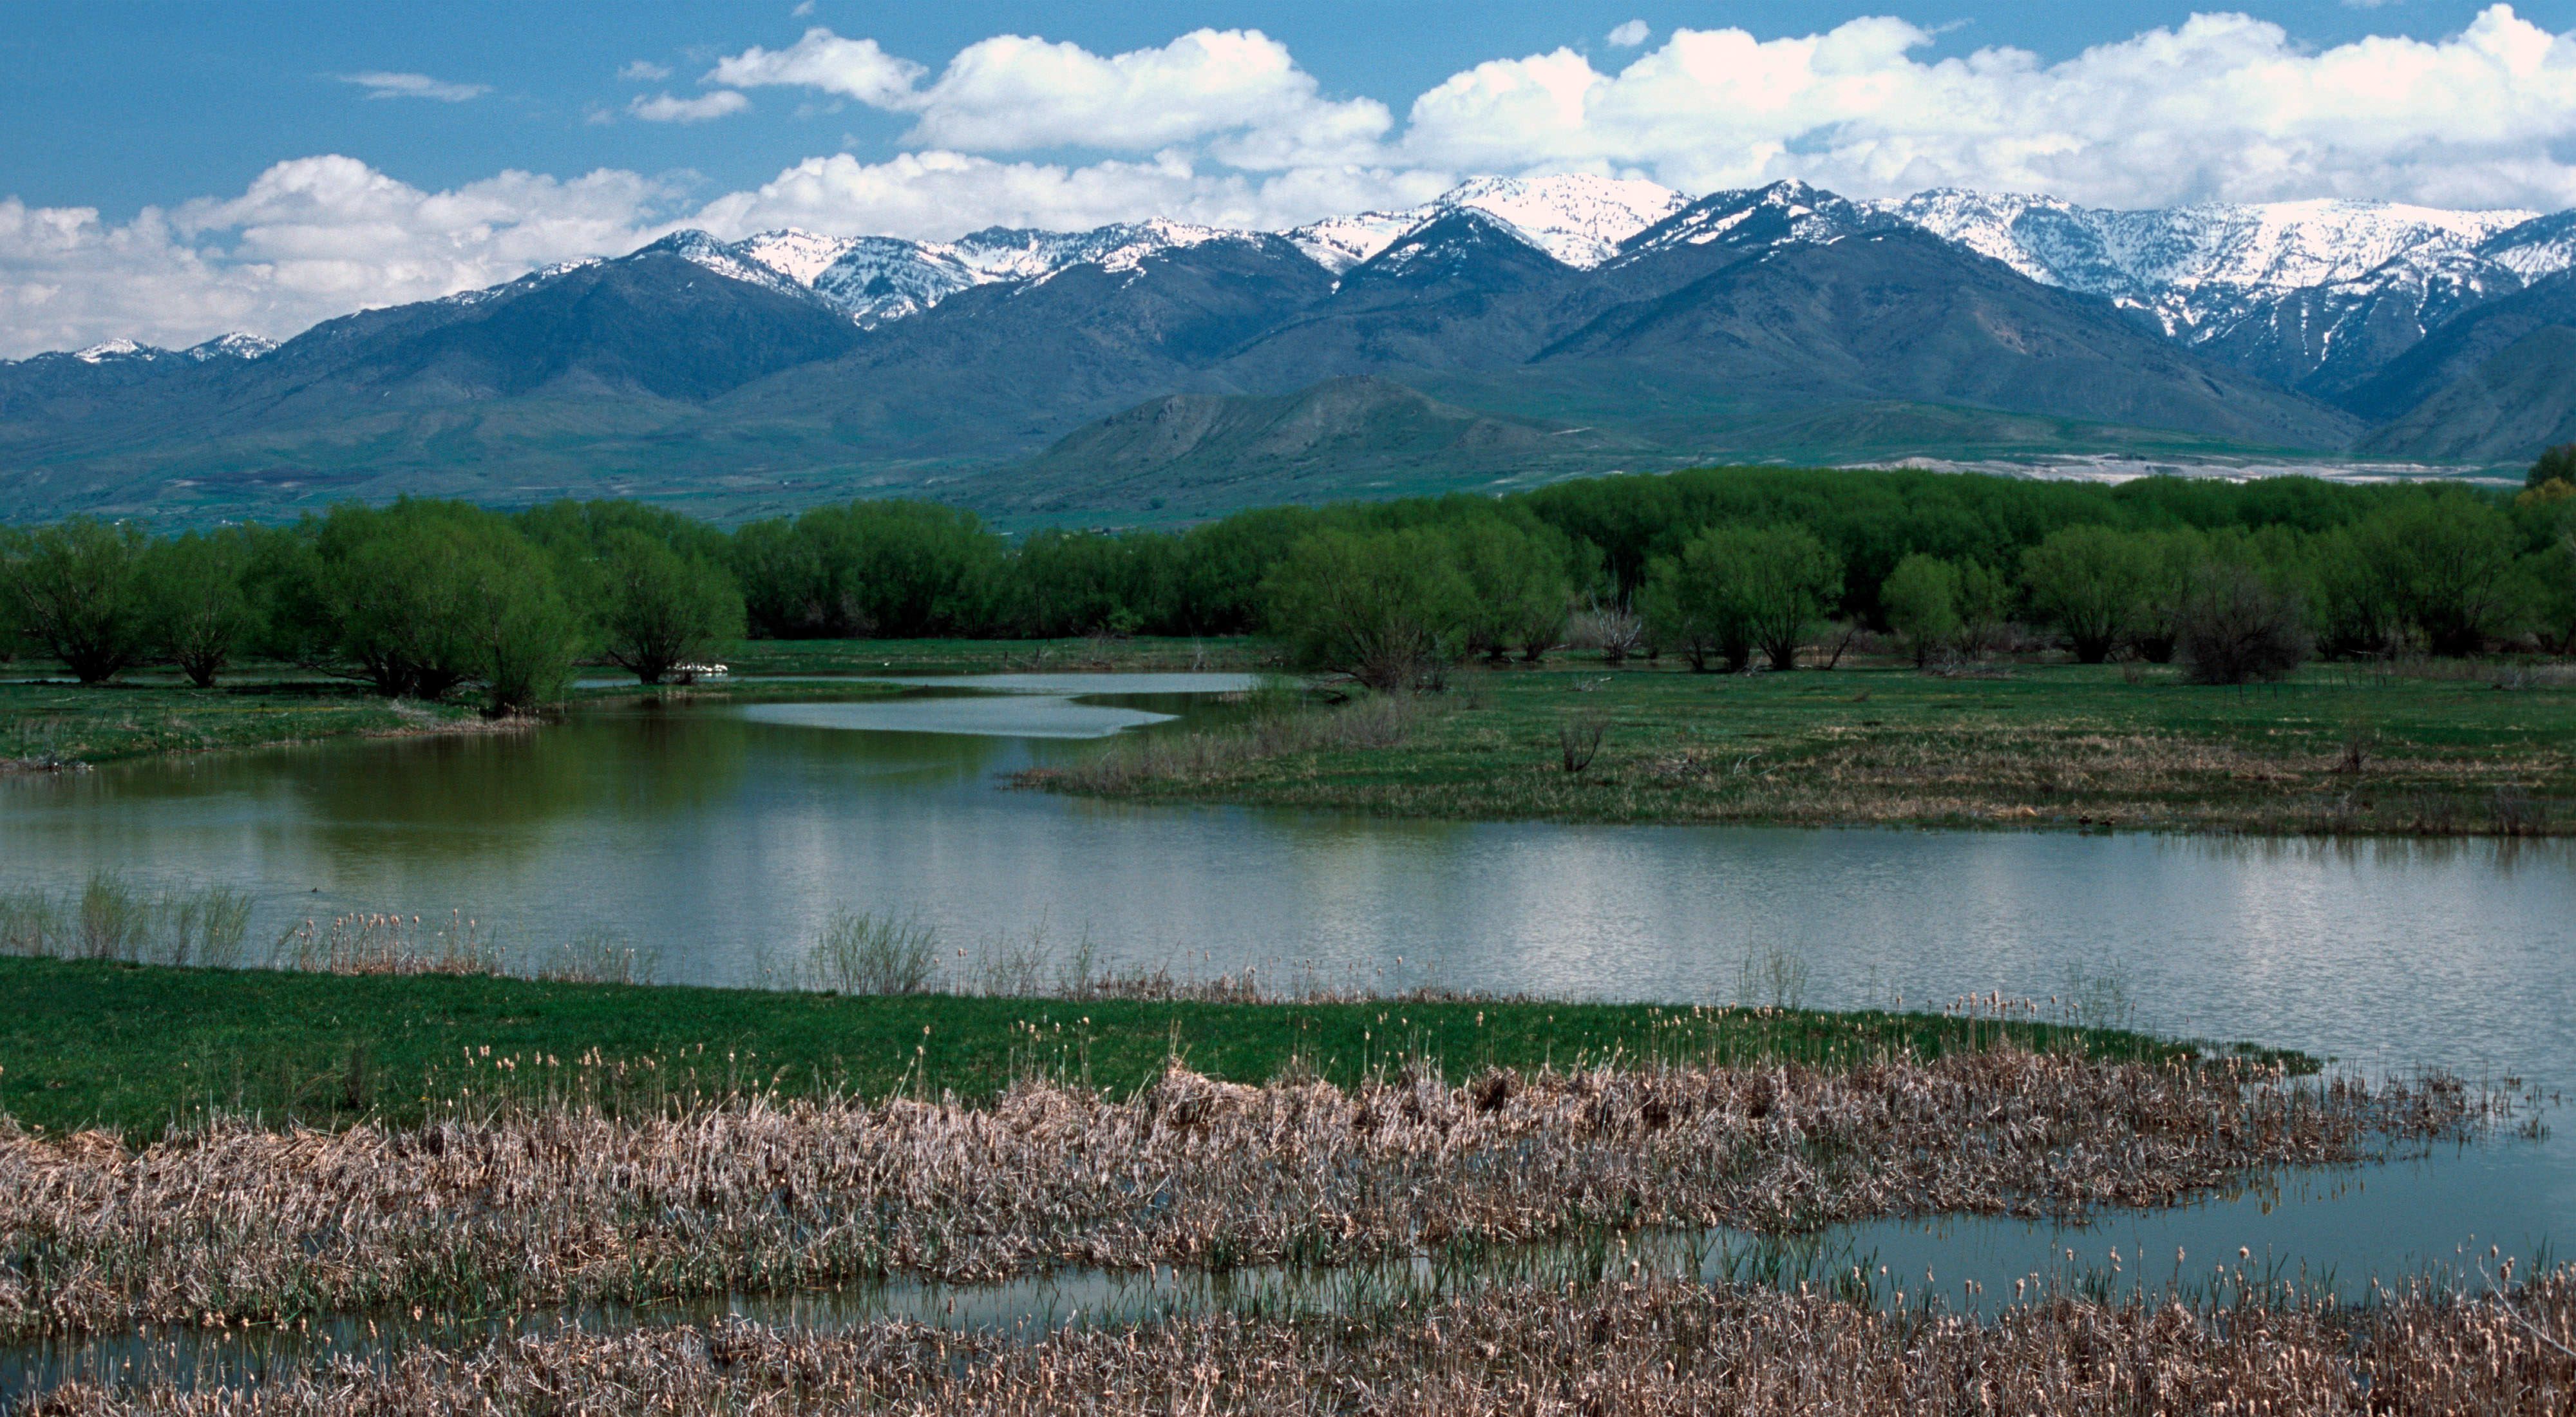 Landscape view of the Bear River and reflected mountains.